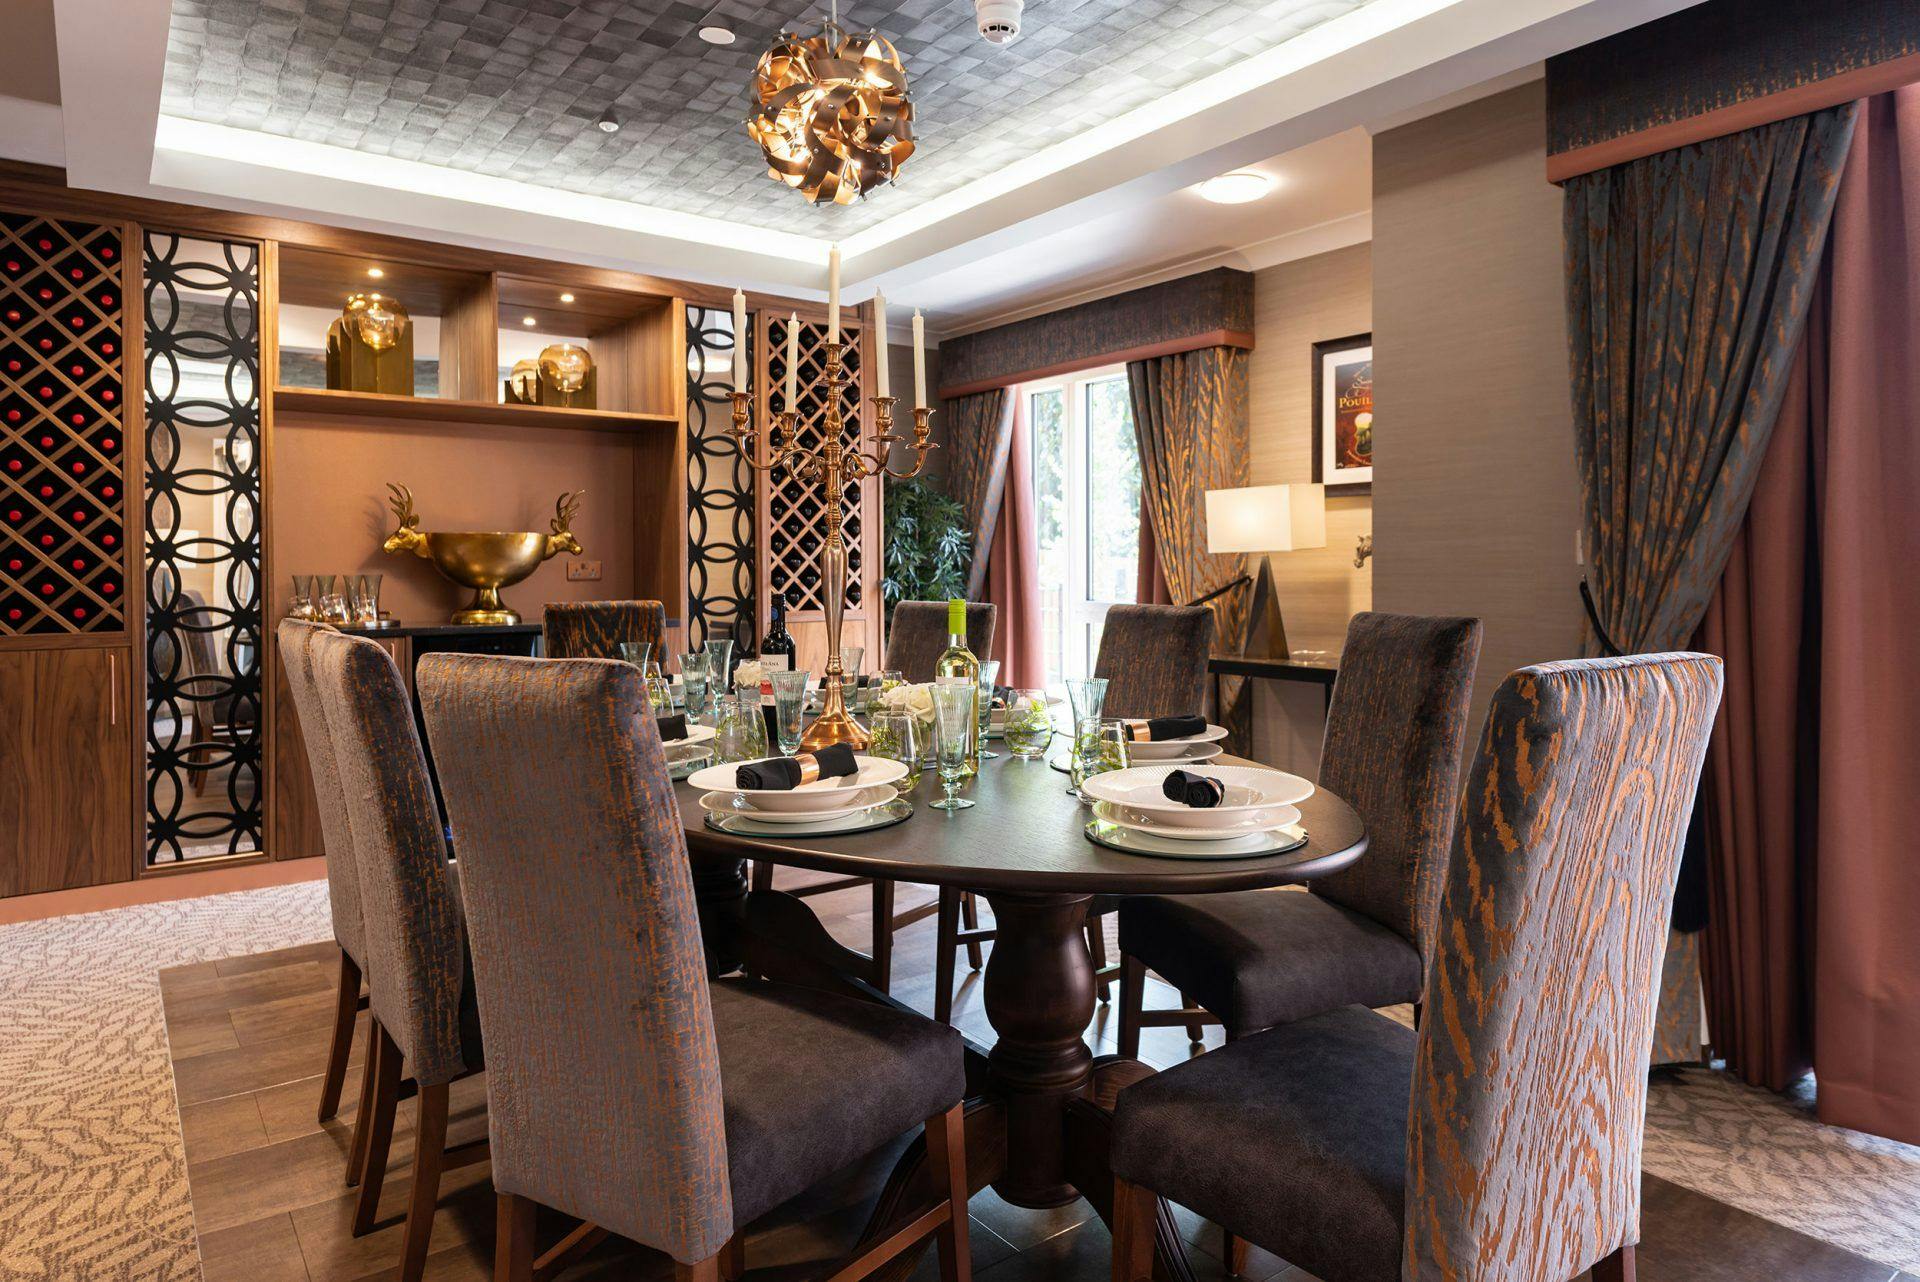 Dining room of Lakeview Grange care home in Chichester, West Sussex